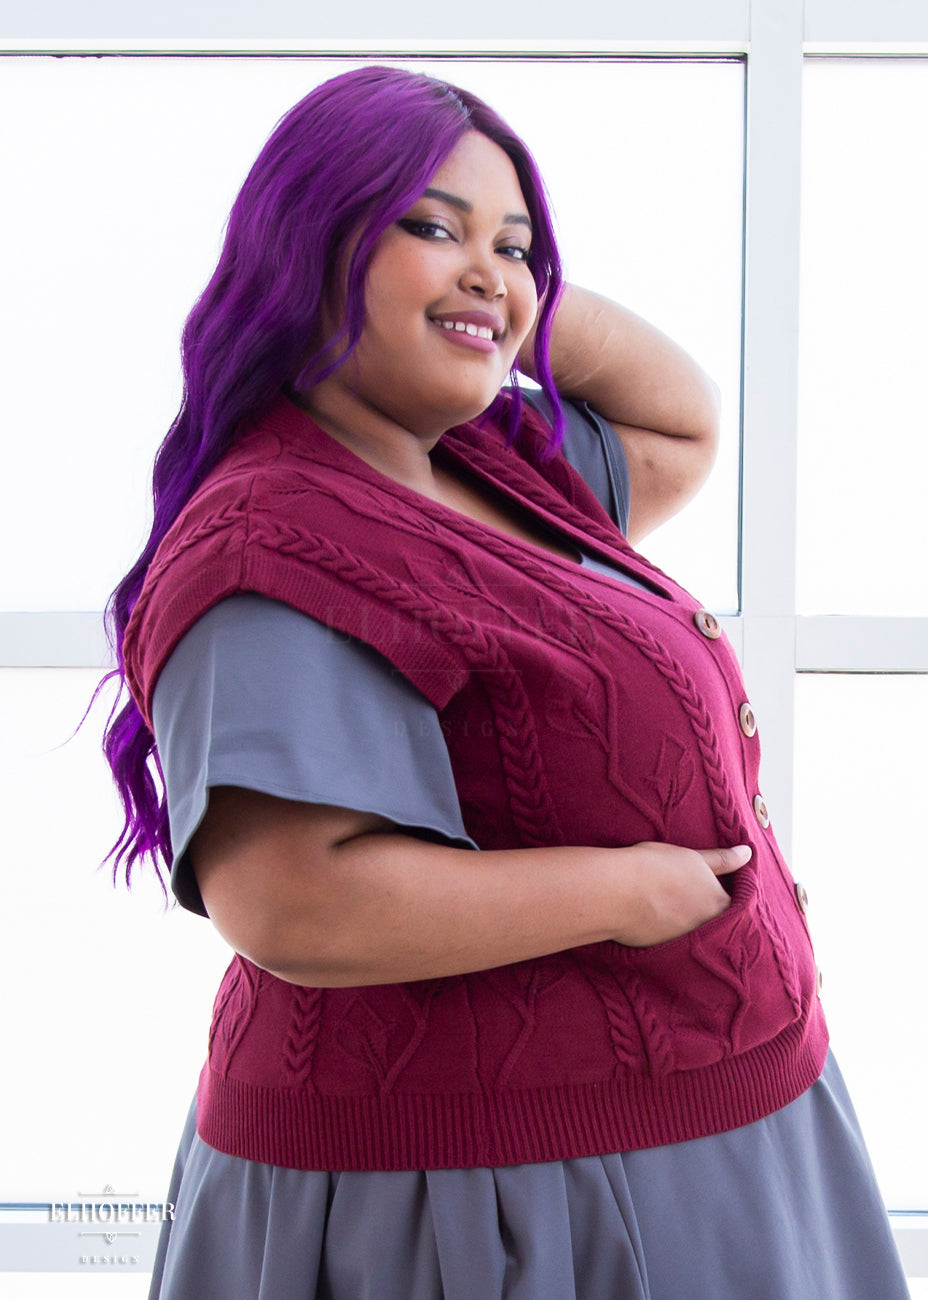 A side view of Jade, a light brown skinned 2xl model with long wavy purple hair, smiling while wearing the L (3XL-4XL) sample of a cranberry red button up knit vest with a leafy vine and cable knit pattern, light brown buttons, and front pockets over a charcoal grey knee length dress with short flutter sleeves.